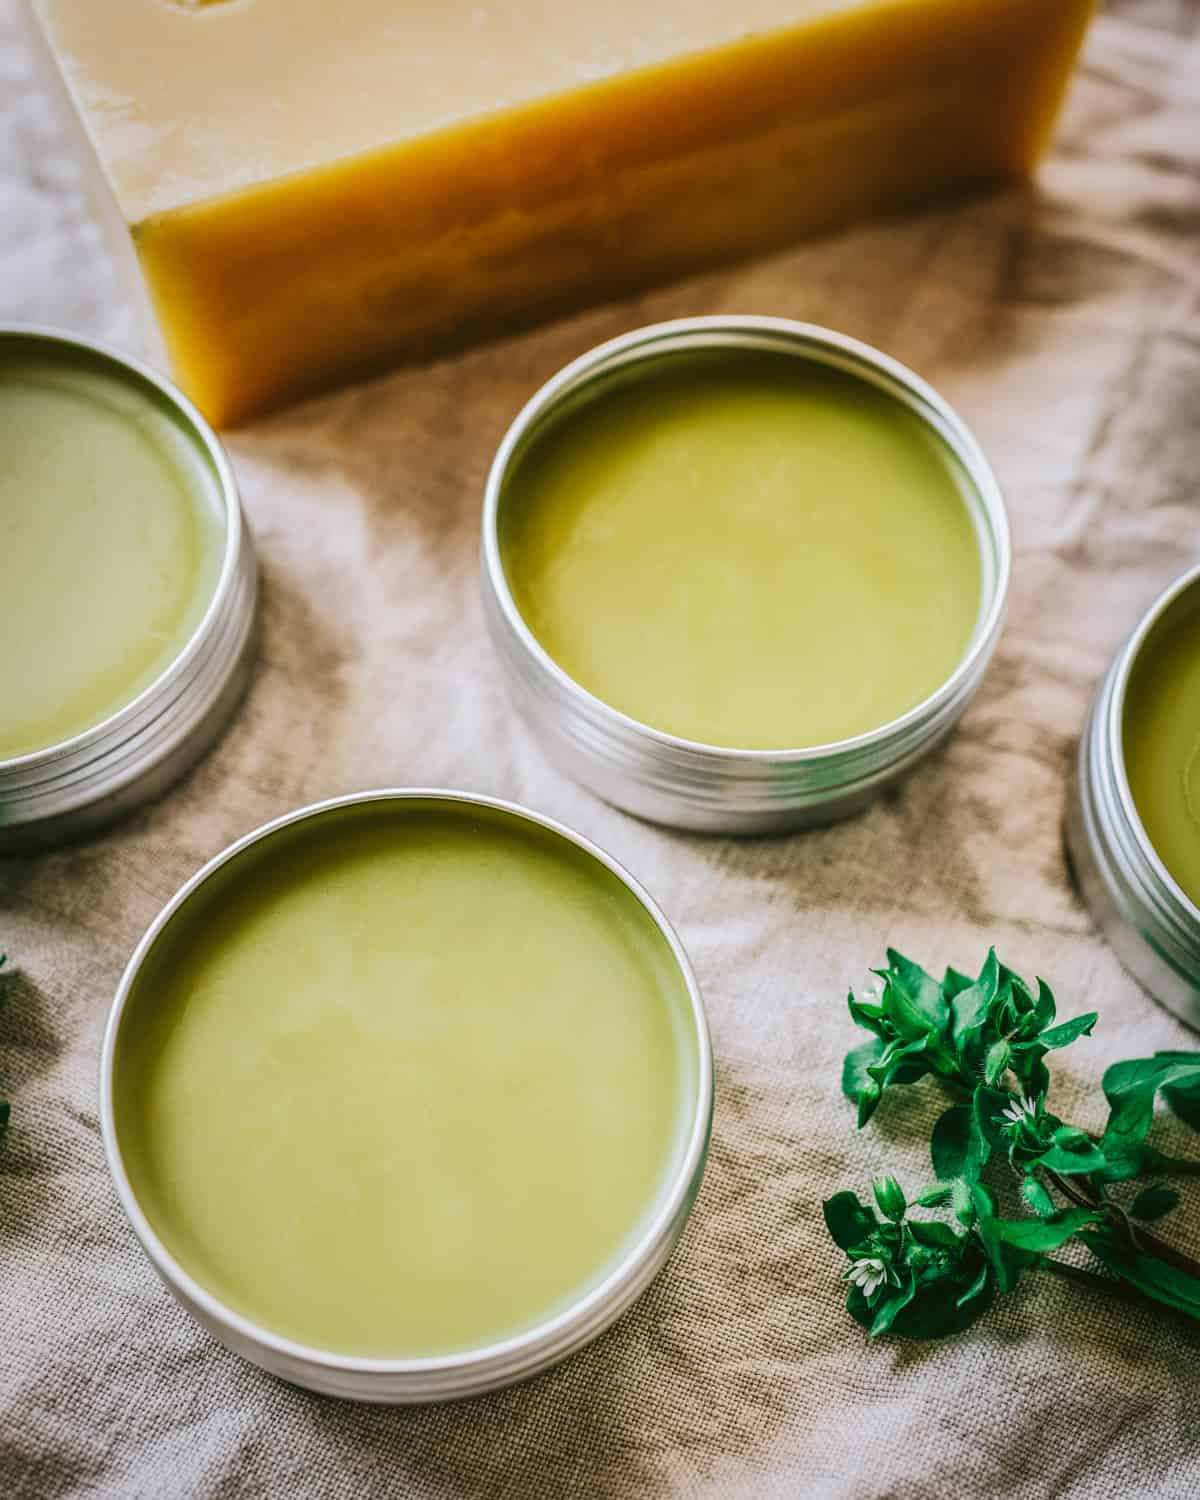 3 tins of chickweed salve with fresh chickweed and a bar of beeswax surrounding, on a natural colored cloth.